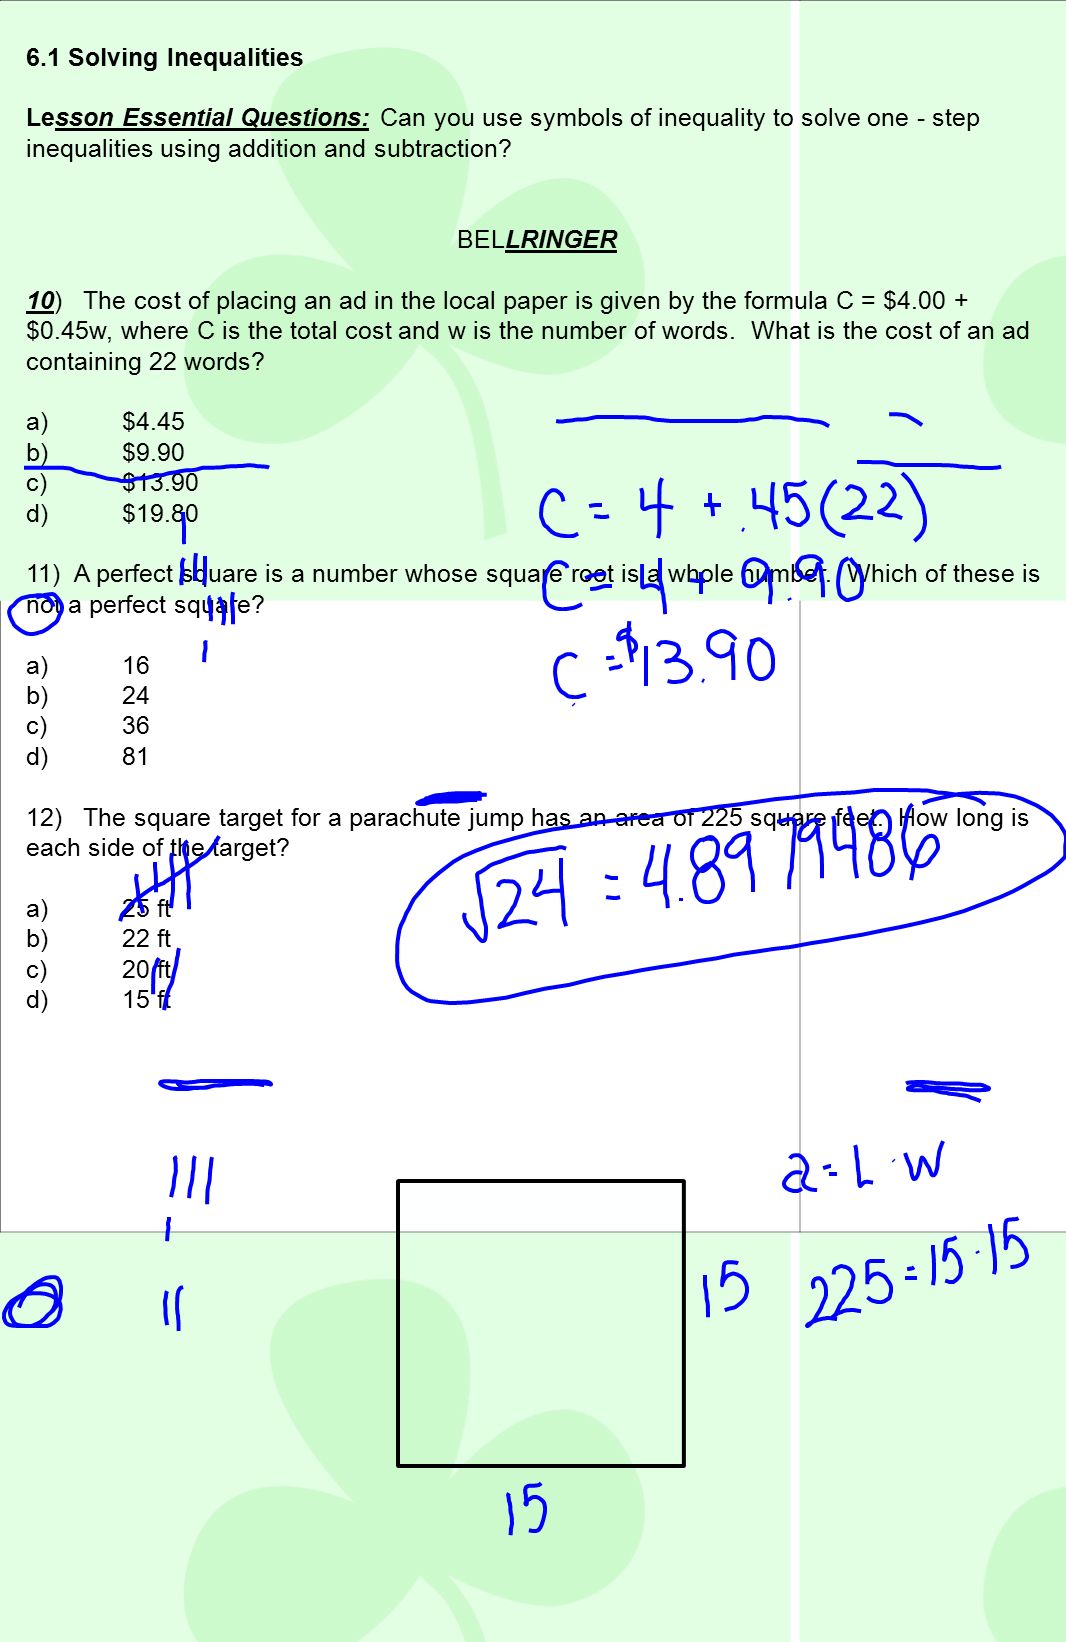 6.1 Solving Inequalities Lesson Essential Questions: Can you use symbols of inequality to solve one - step inequalities using addition and subtraction.